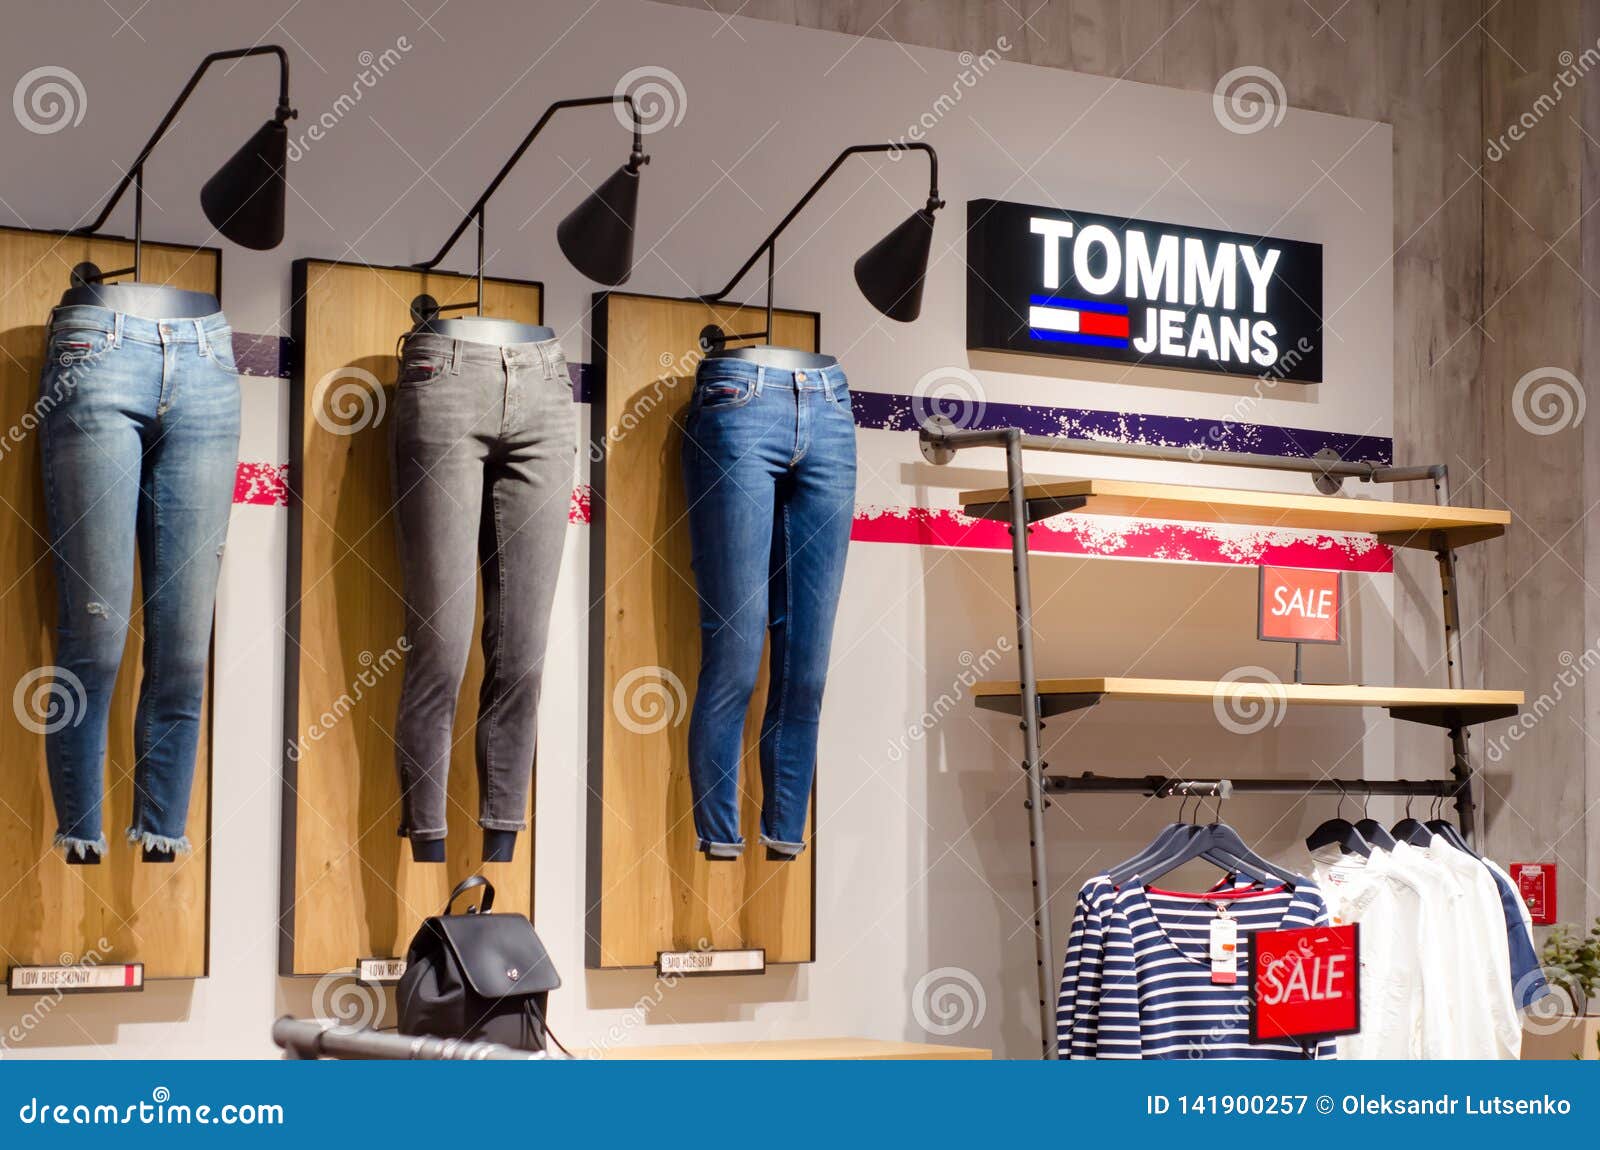 Verdorren En team maart Soest, Germany - January 9, 2019: Tommy Jeans Clothes in the Store  Editorial Photography - Image of flagship, cloths: 141900257